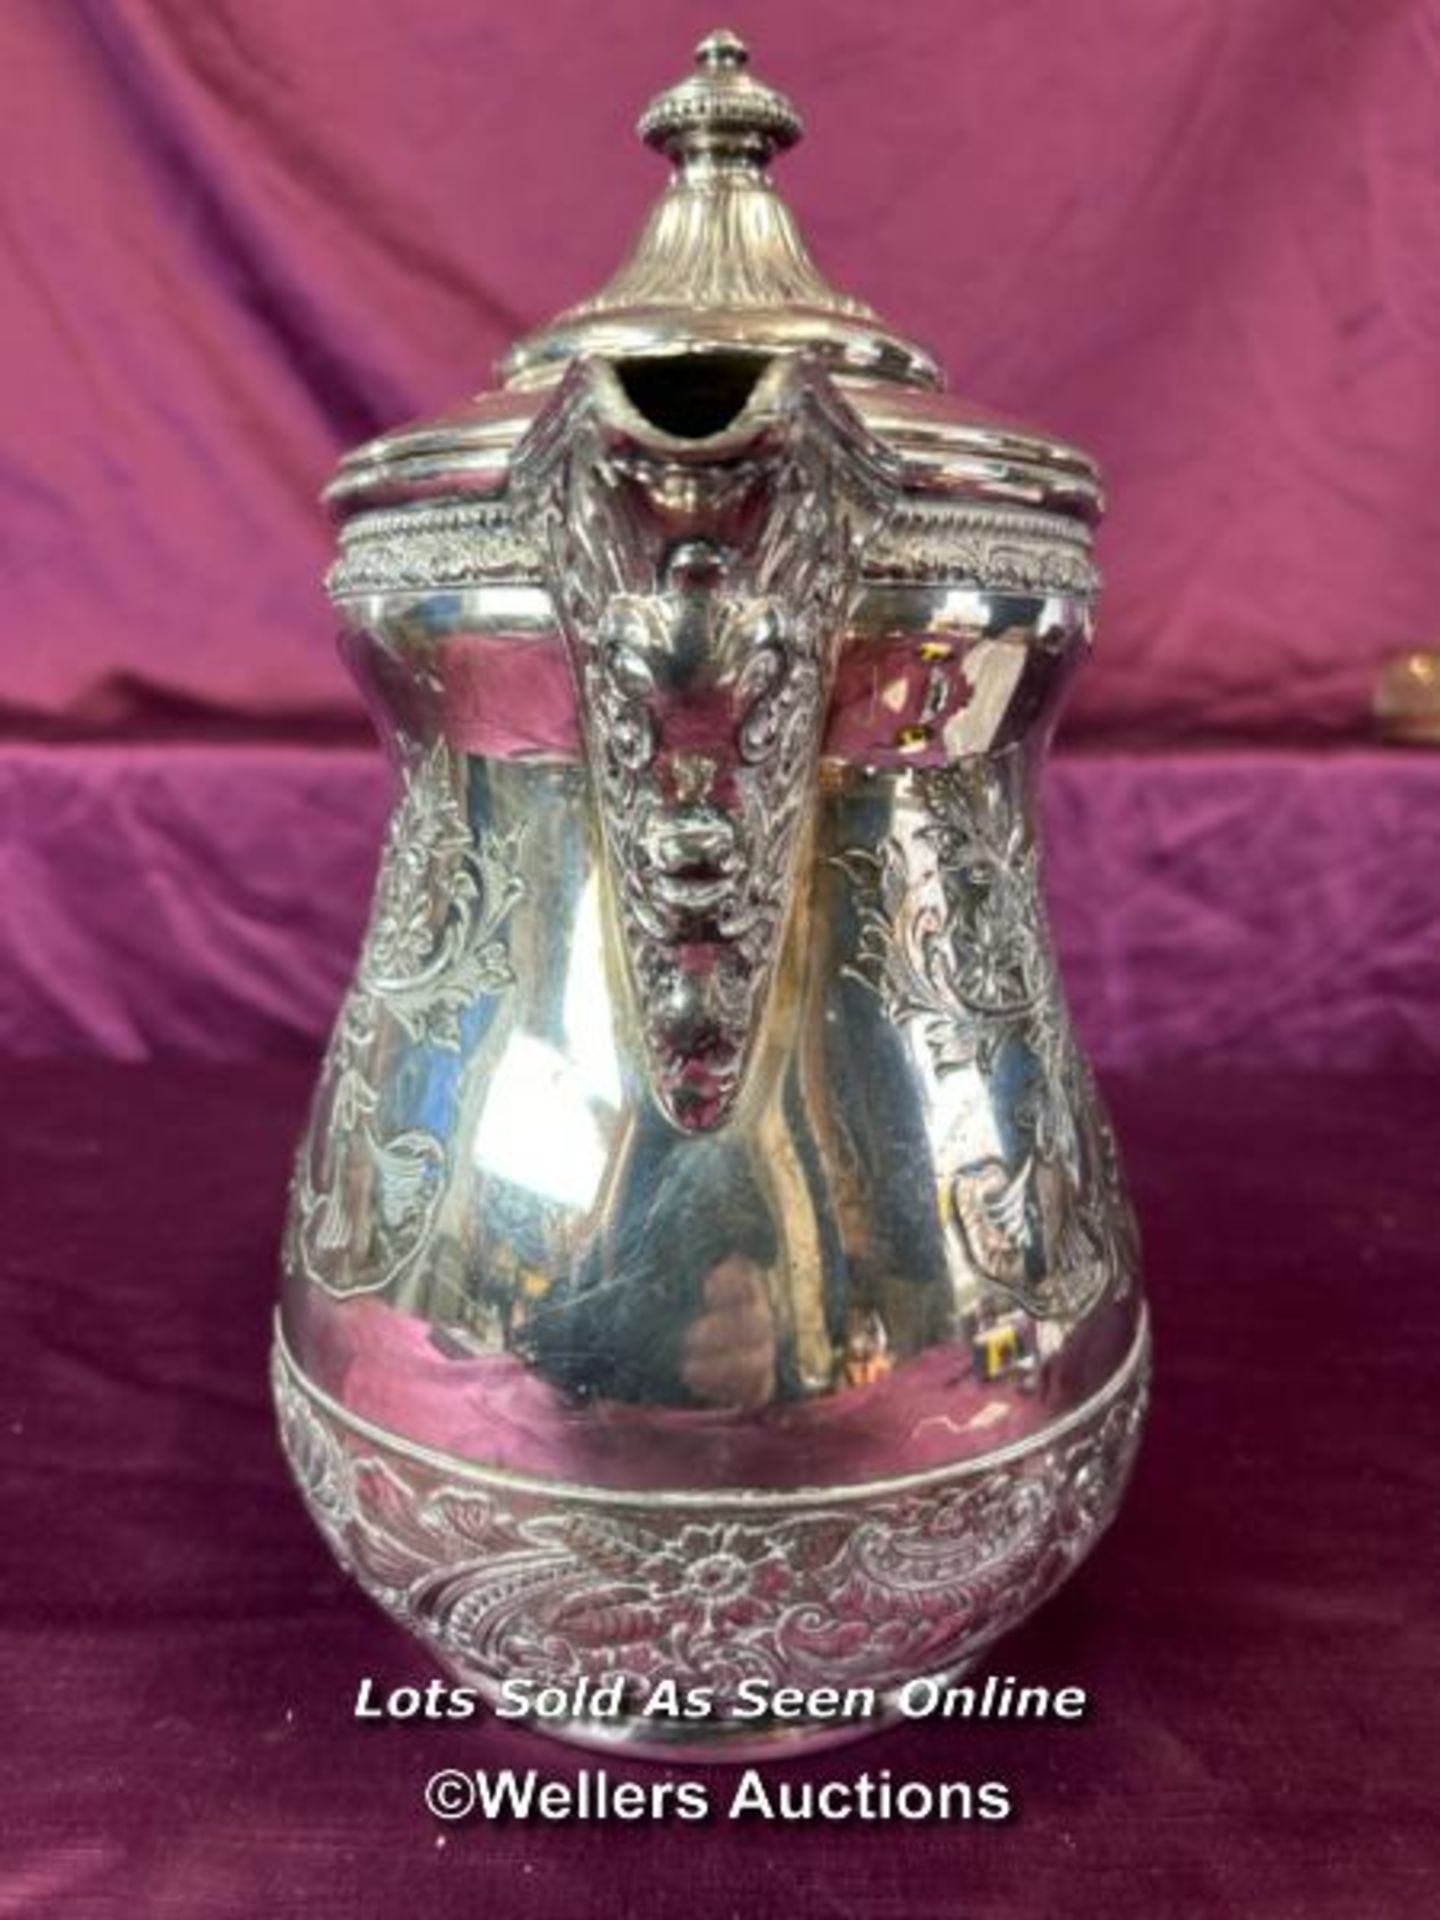 A SILVER PLATED JUG MADE BY MIDDLETOWN PLATE CO., HEIGHT 29CM - Image 2 of 4